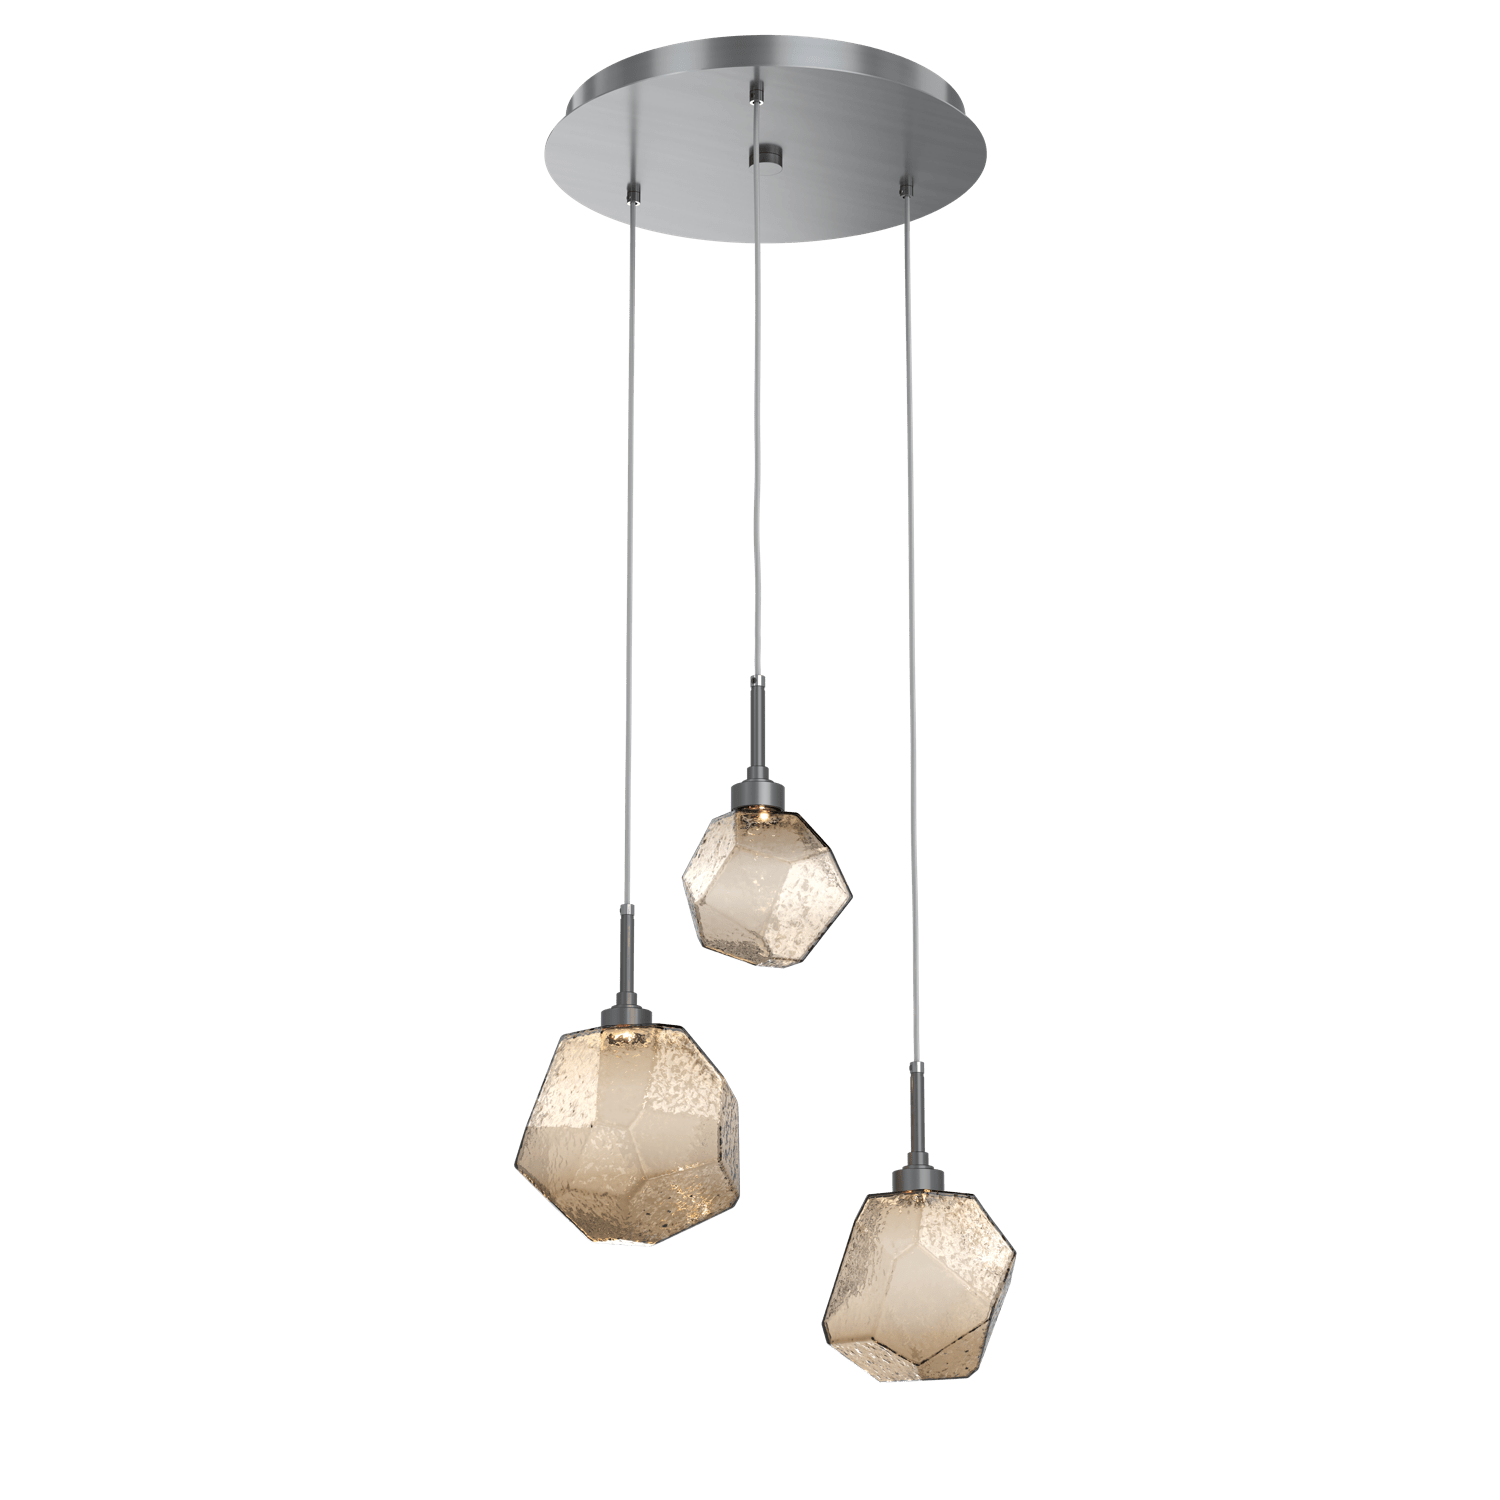 CHB0039-03-GM-B-Hammerton-Studio-Gem-3-light-round-pendant-chandelier-with-gunmetal-finish-and-bronze-blown-glass-shades-and-LED-lamping